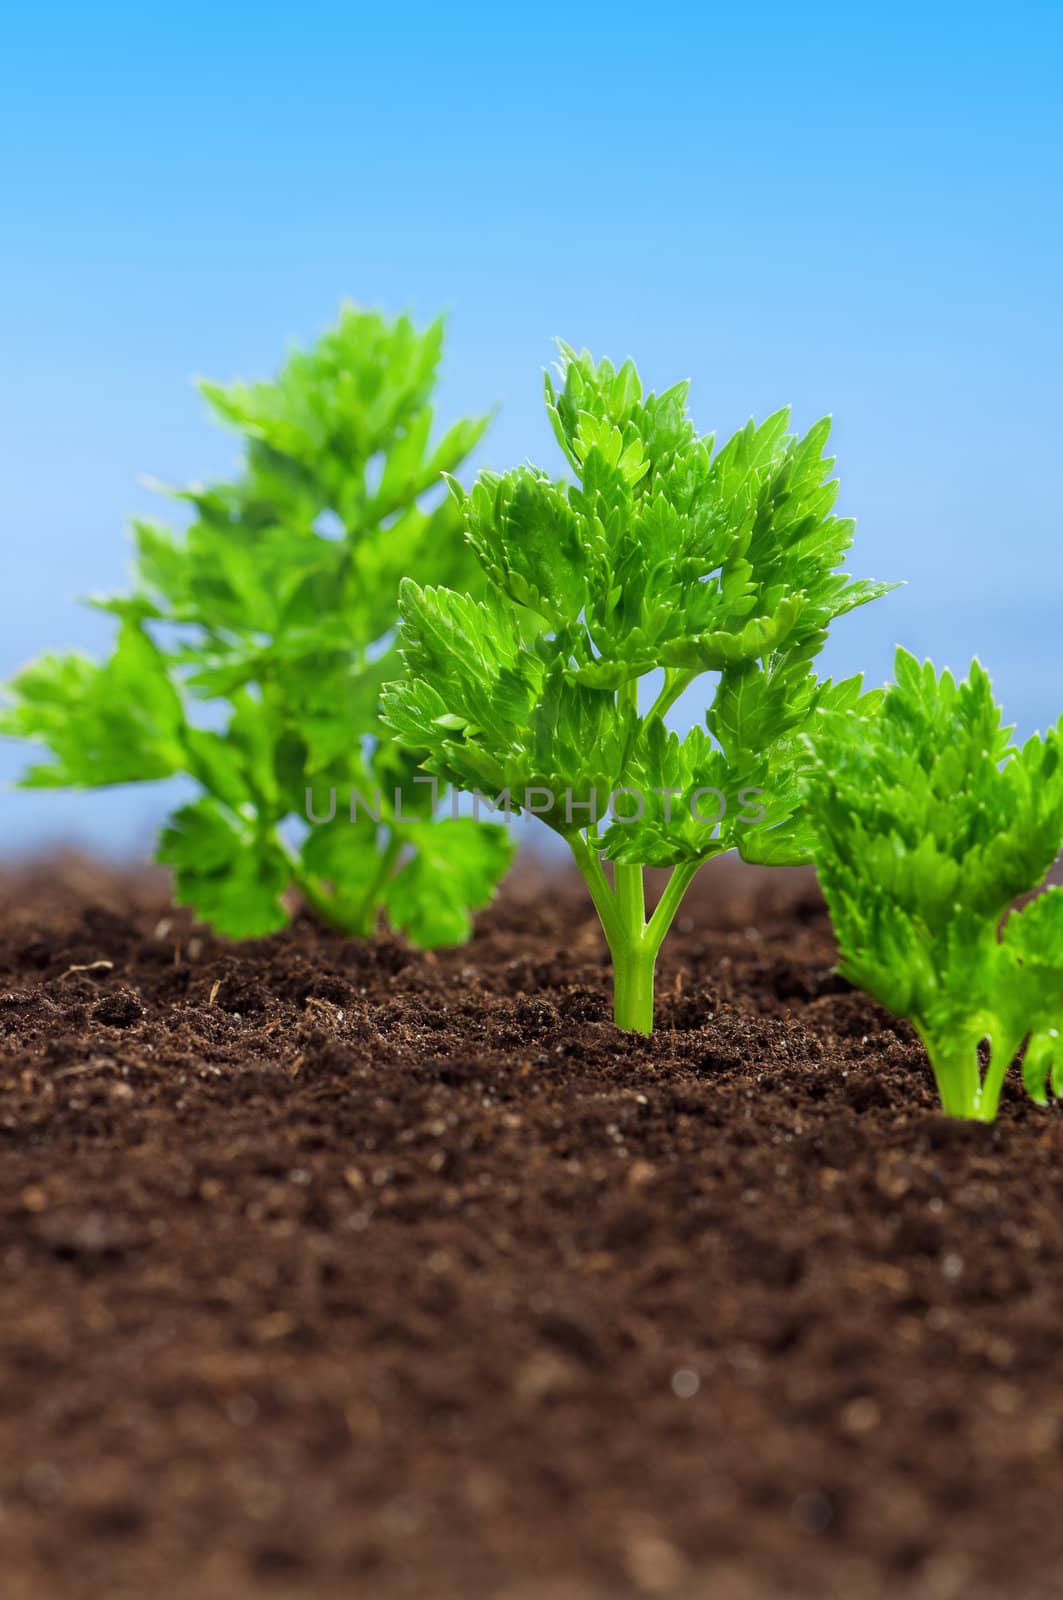 Close-up of green parsley growing out of soil